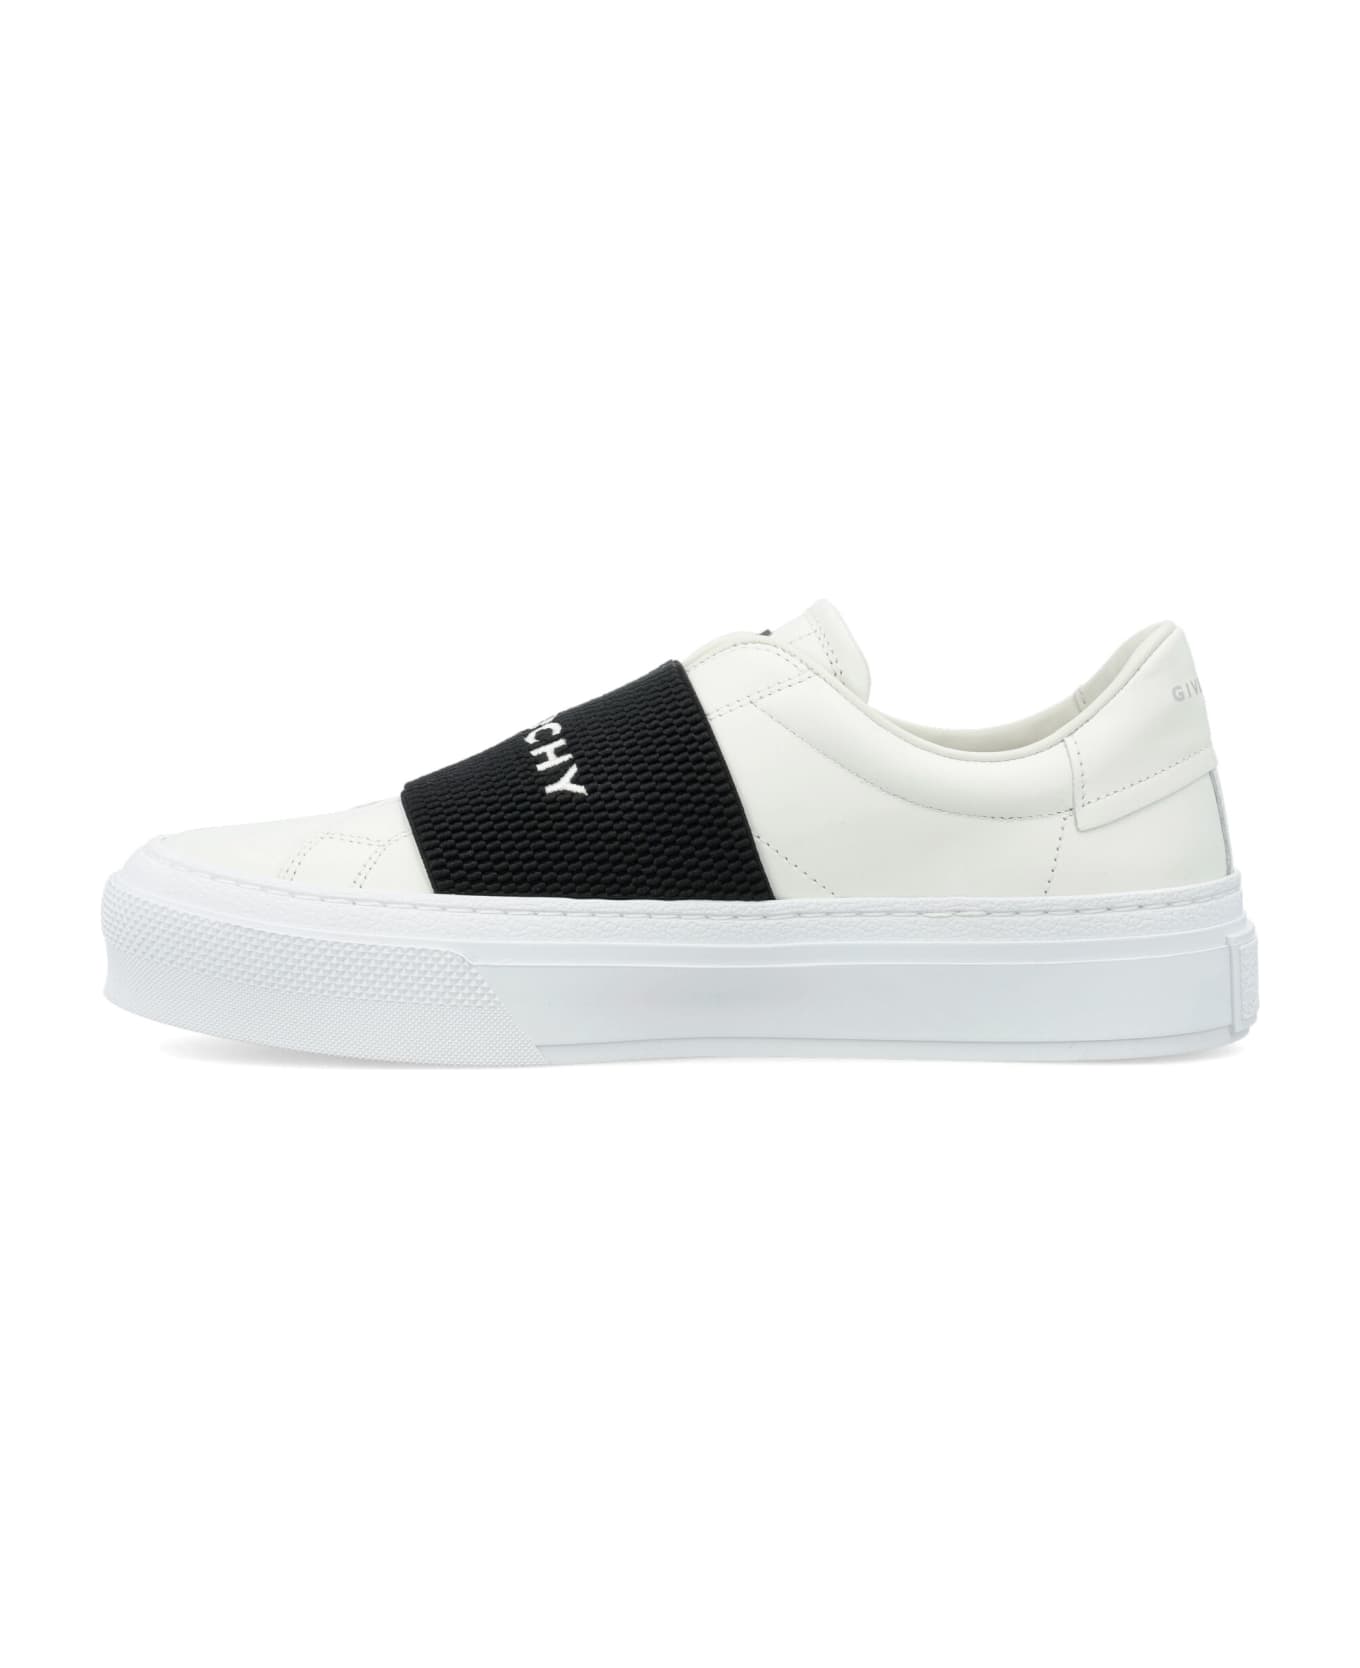 Givenchy City Sport Elastic Sneakers - WHITE/BLACK